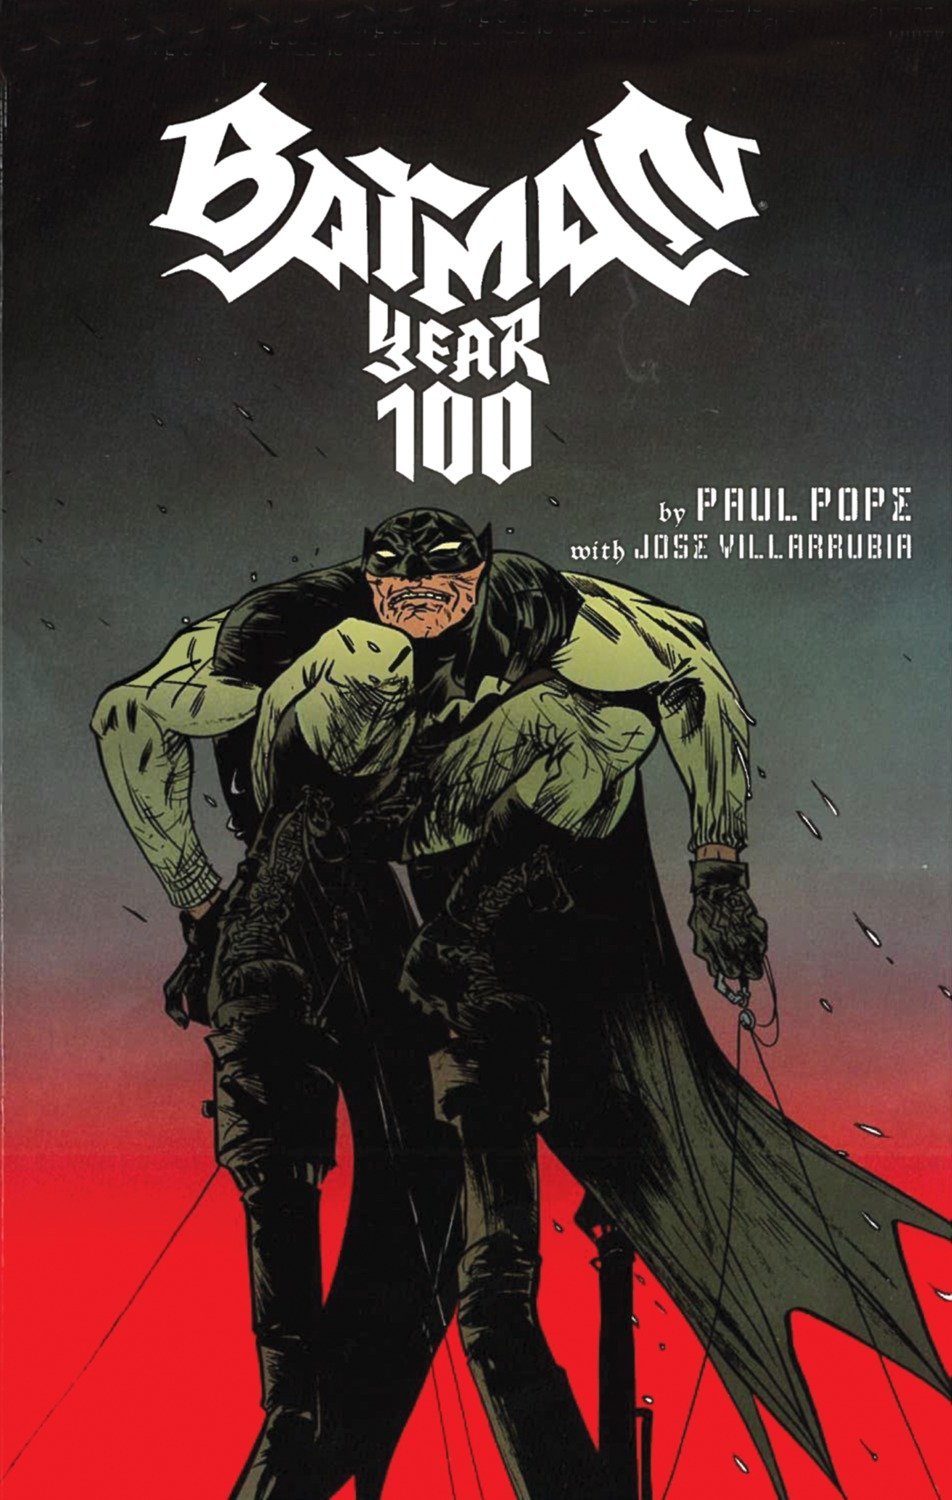 Batman: Year One Hundred by Paul Pope with Jose Villarrubia